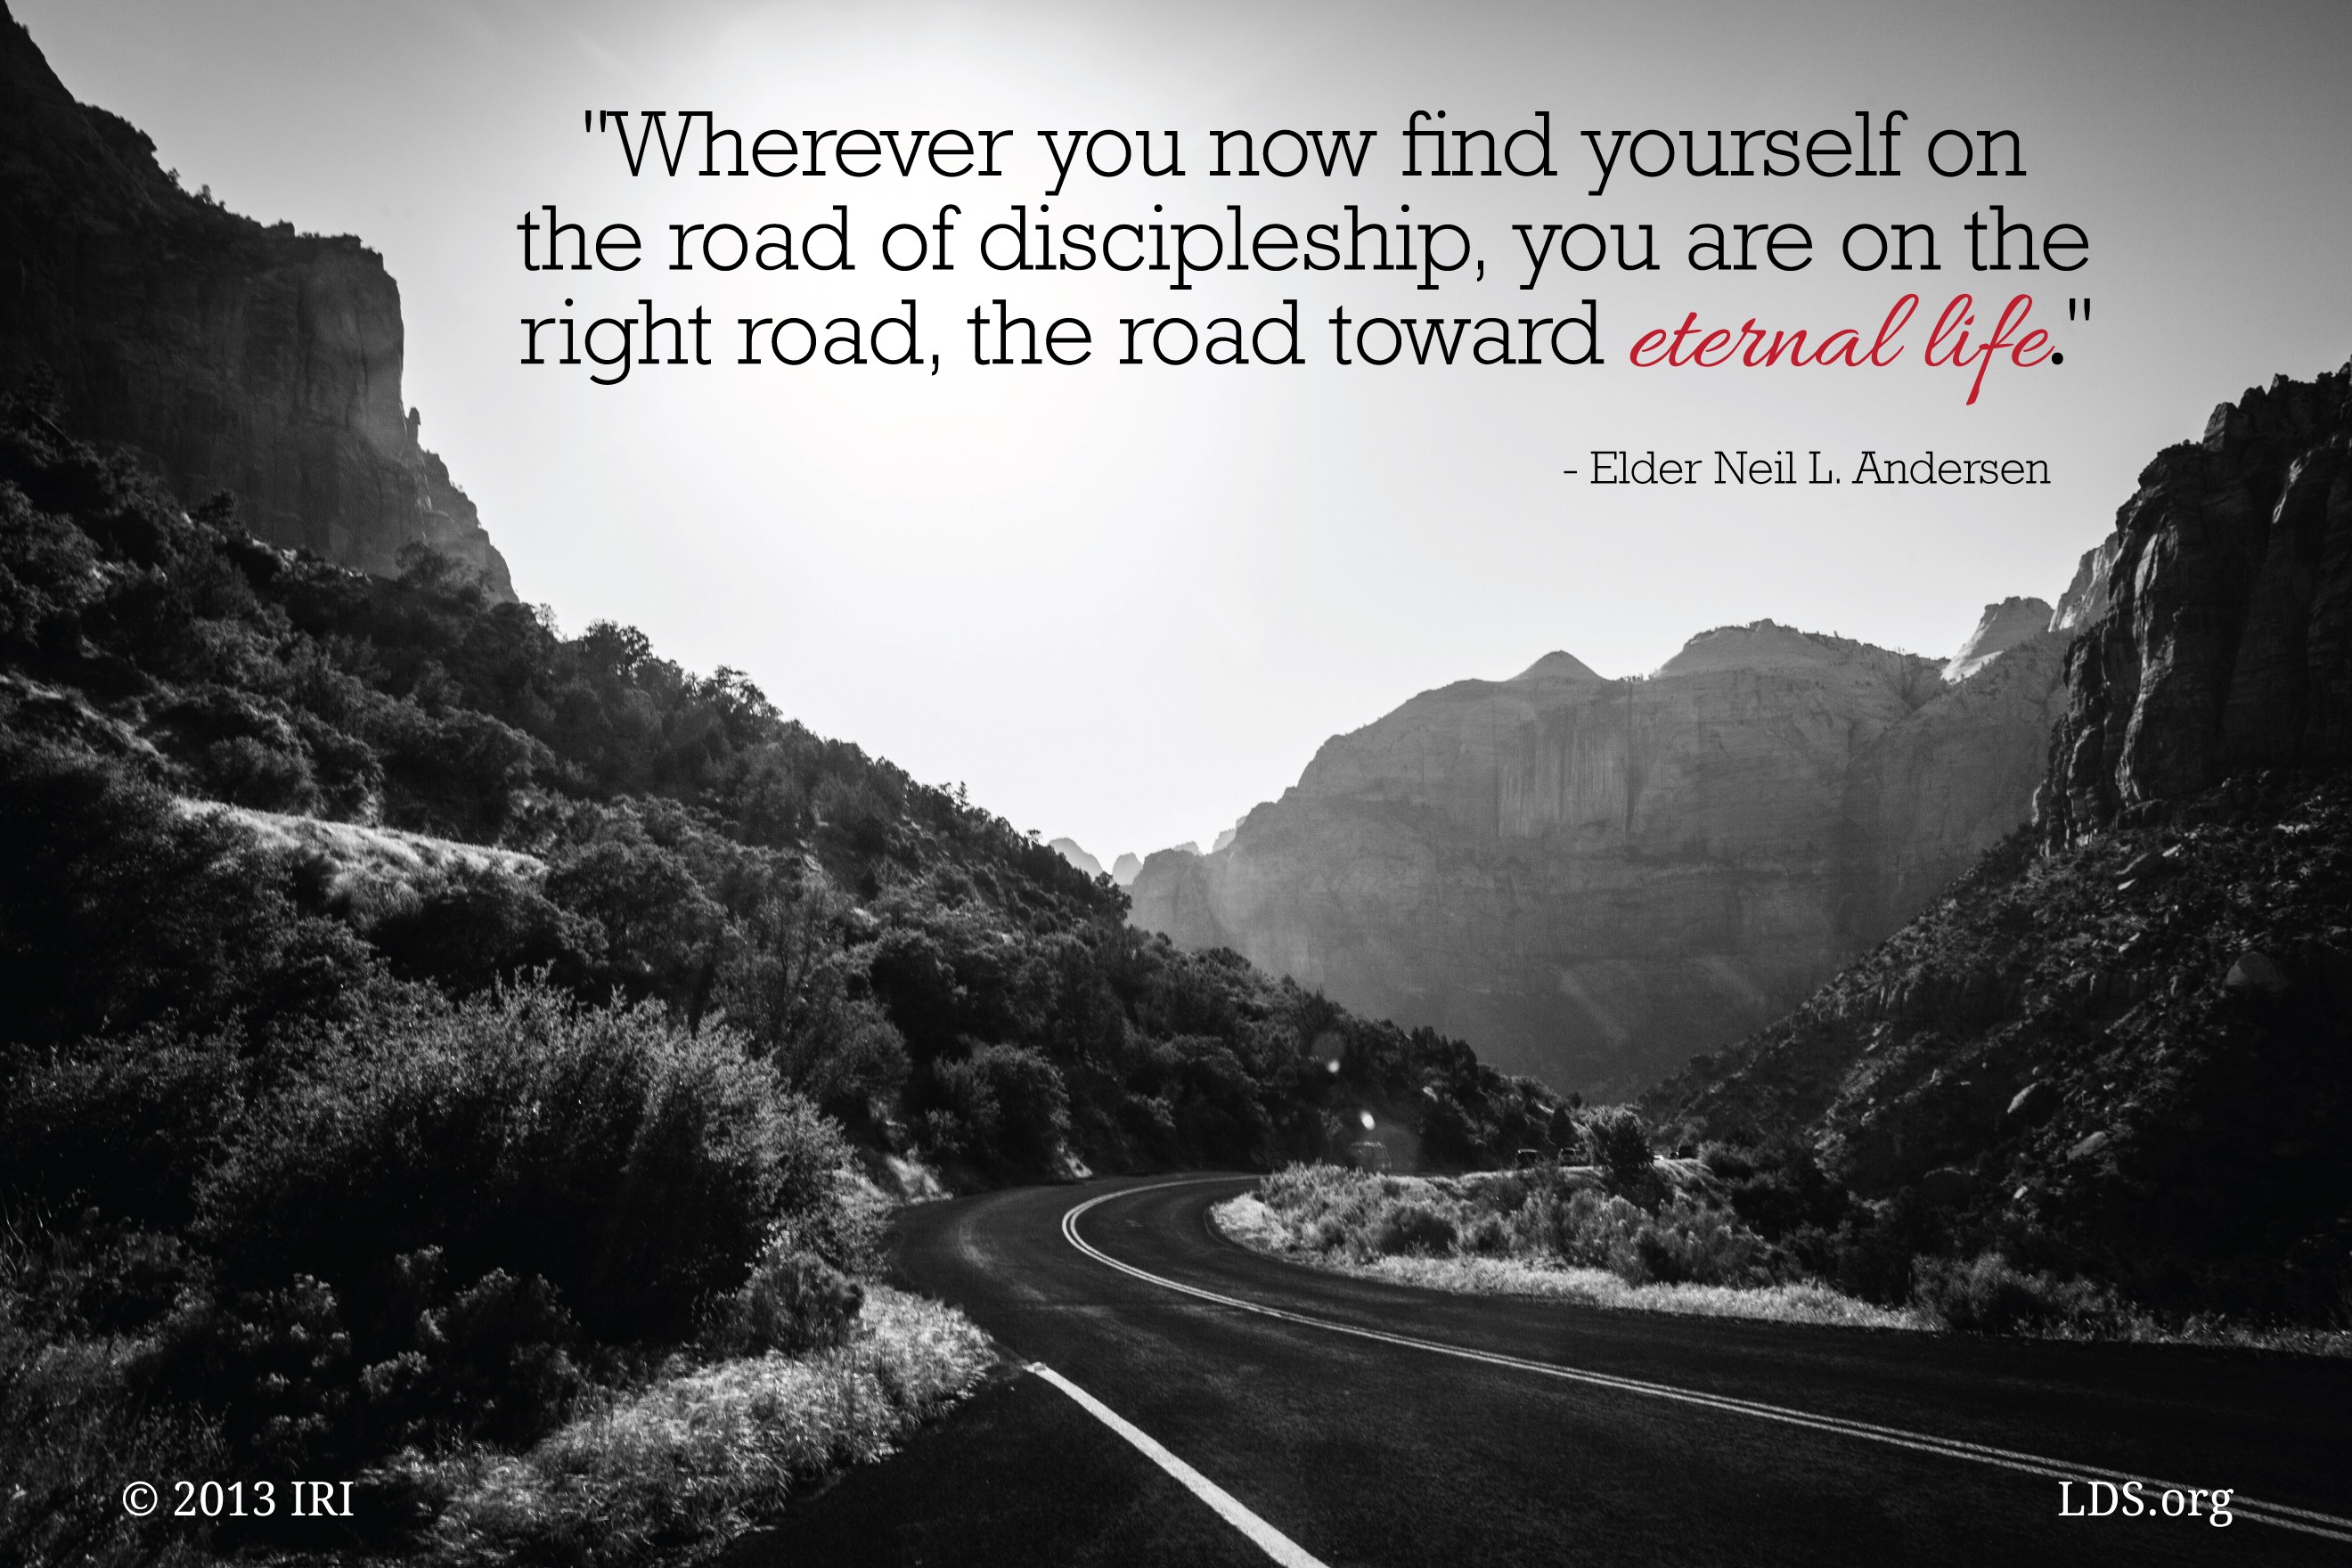 A black-and-white image of a road passing through mountains, with a quote by Elder Neil L. Andersen on top: “The road of discipleship.”